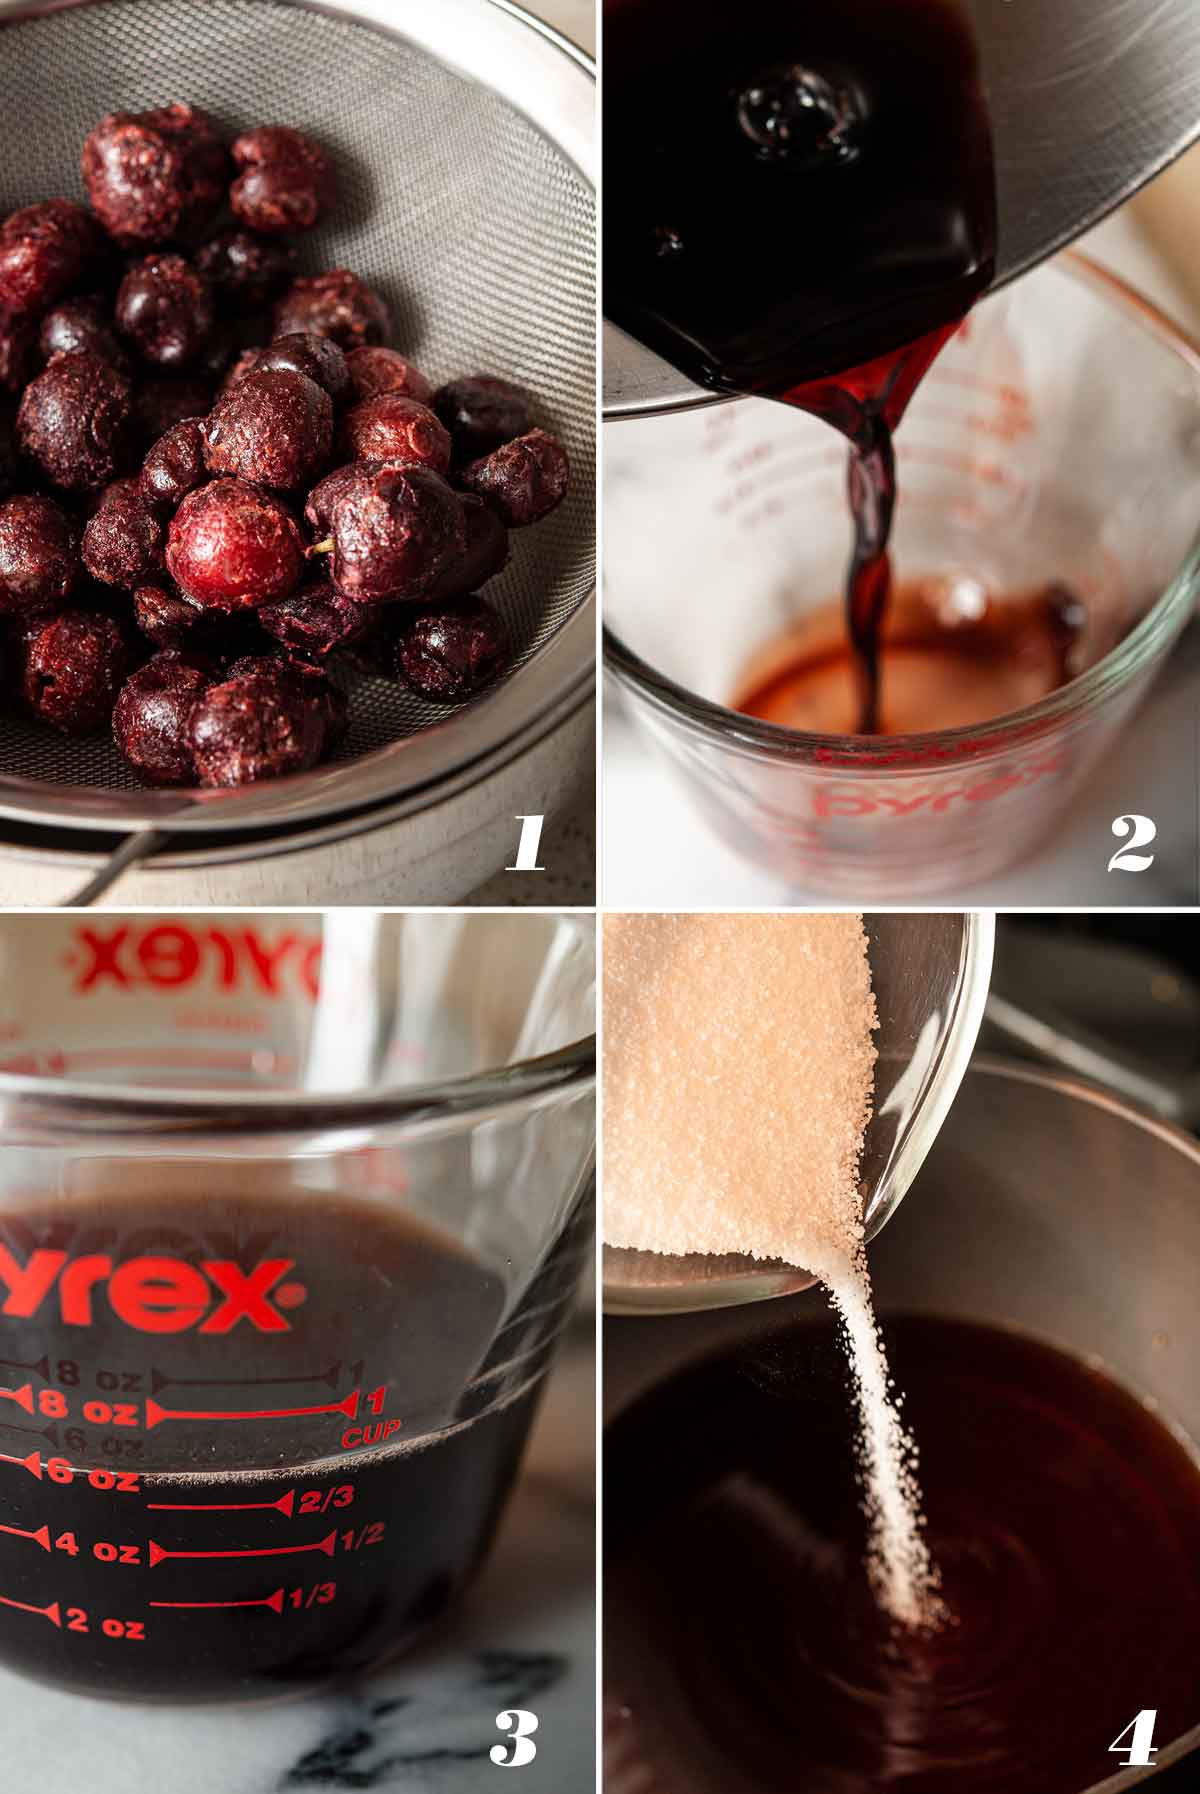 A collage of 4 numbered images showing how to thaw cherries and make spiced syrup.